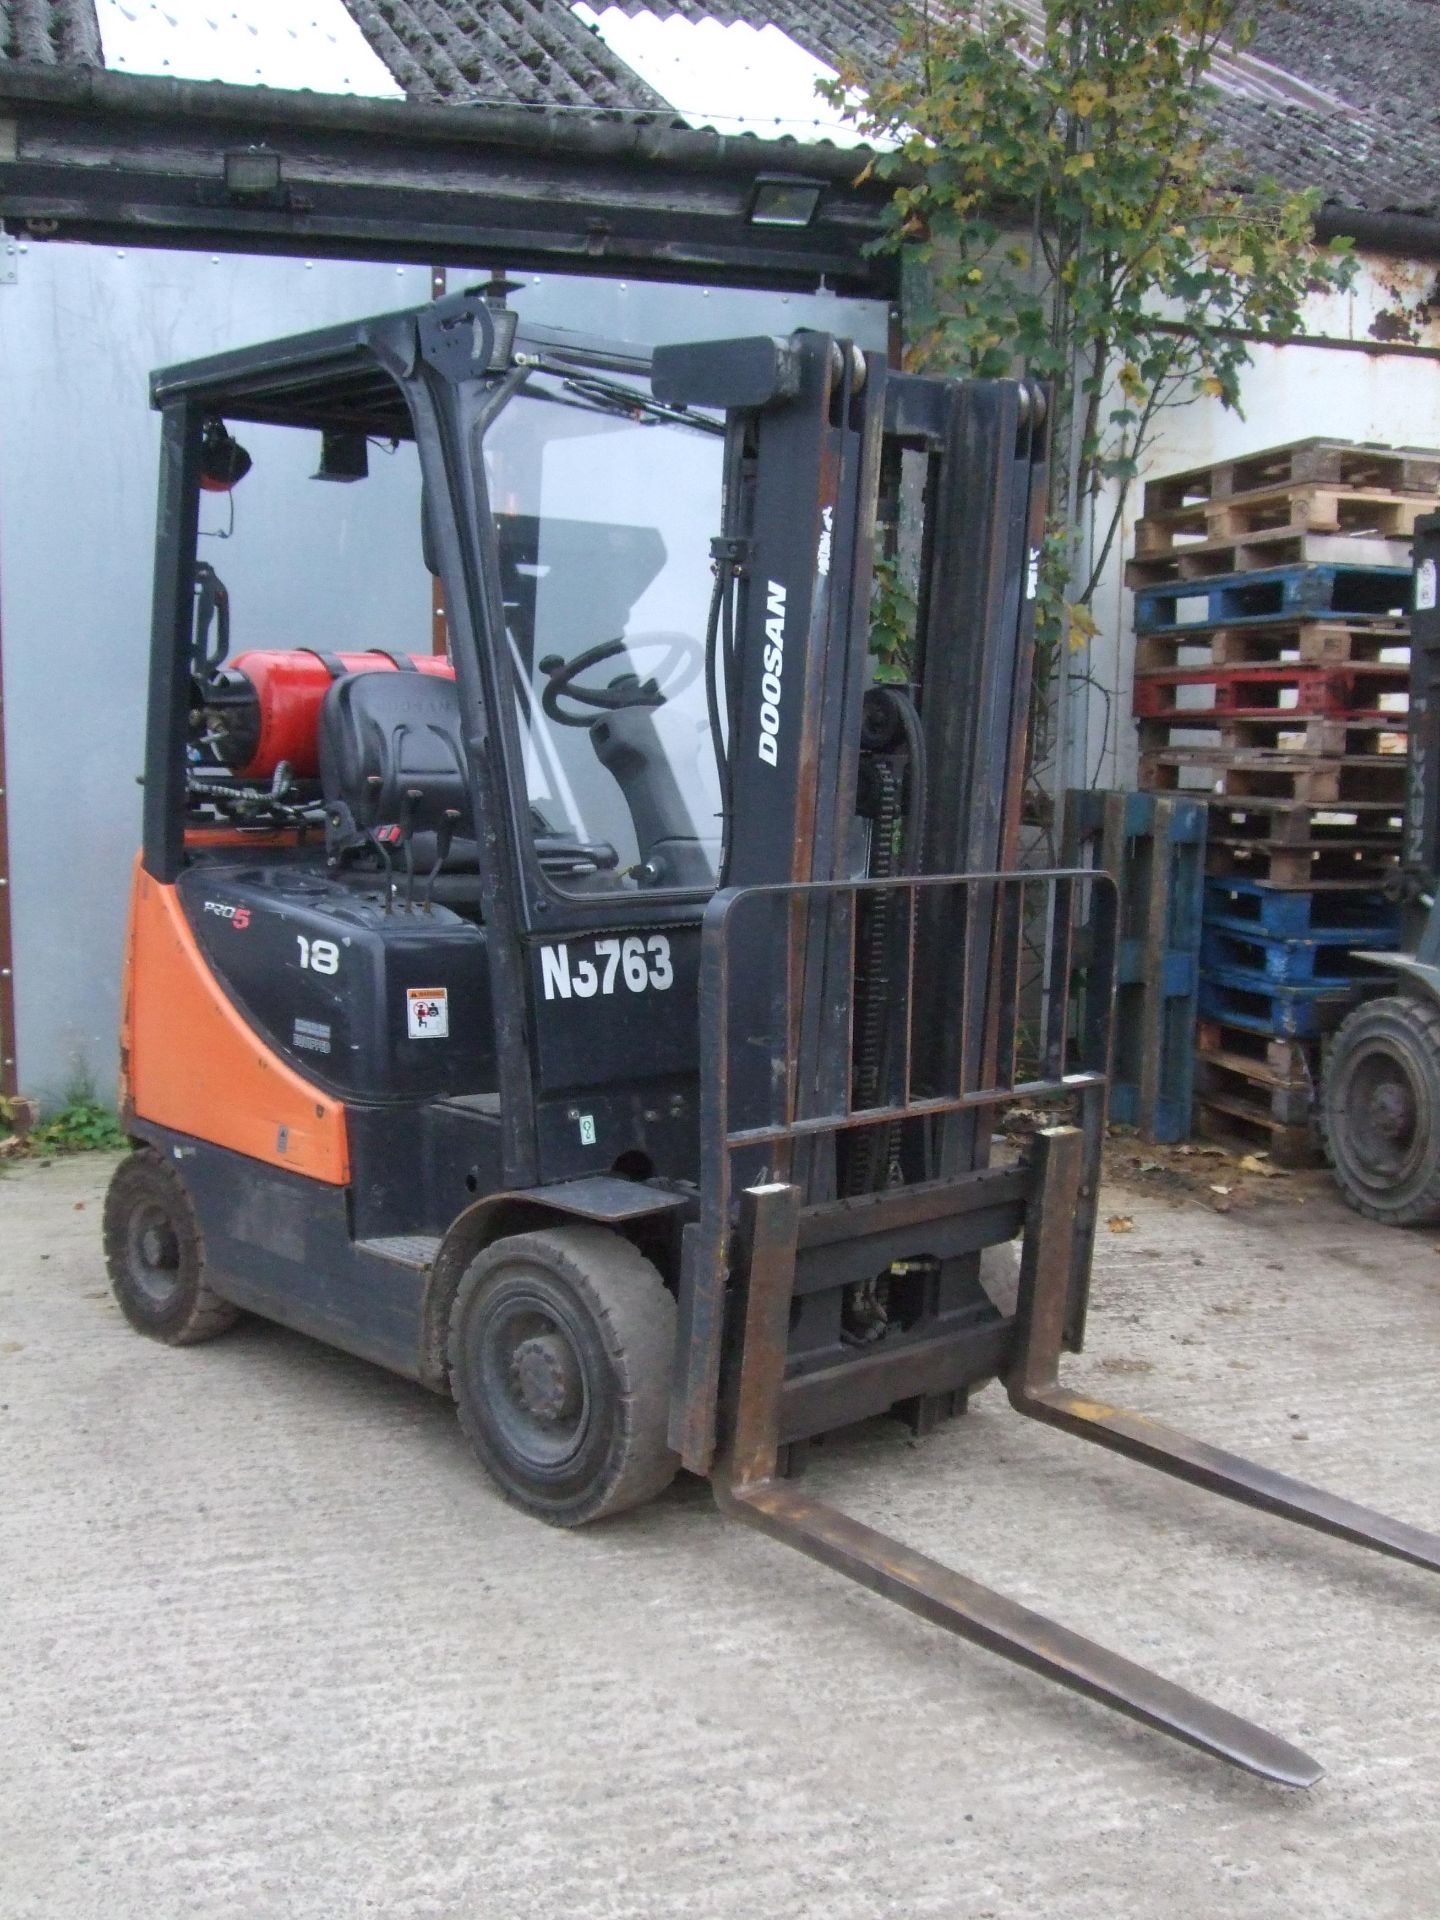 DOOSAN G18-5 GAS FORKLIFT - TRIPLE / CONTAINER SPEC MAST - YOM 2013 - 6872 RECORDED HOURS